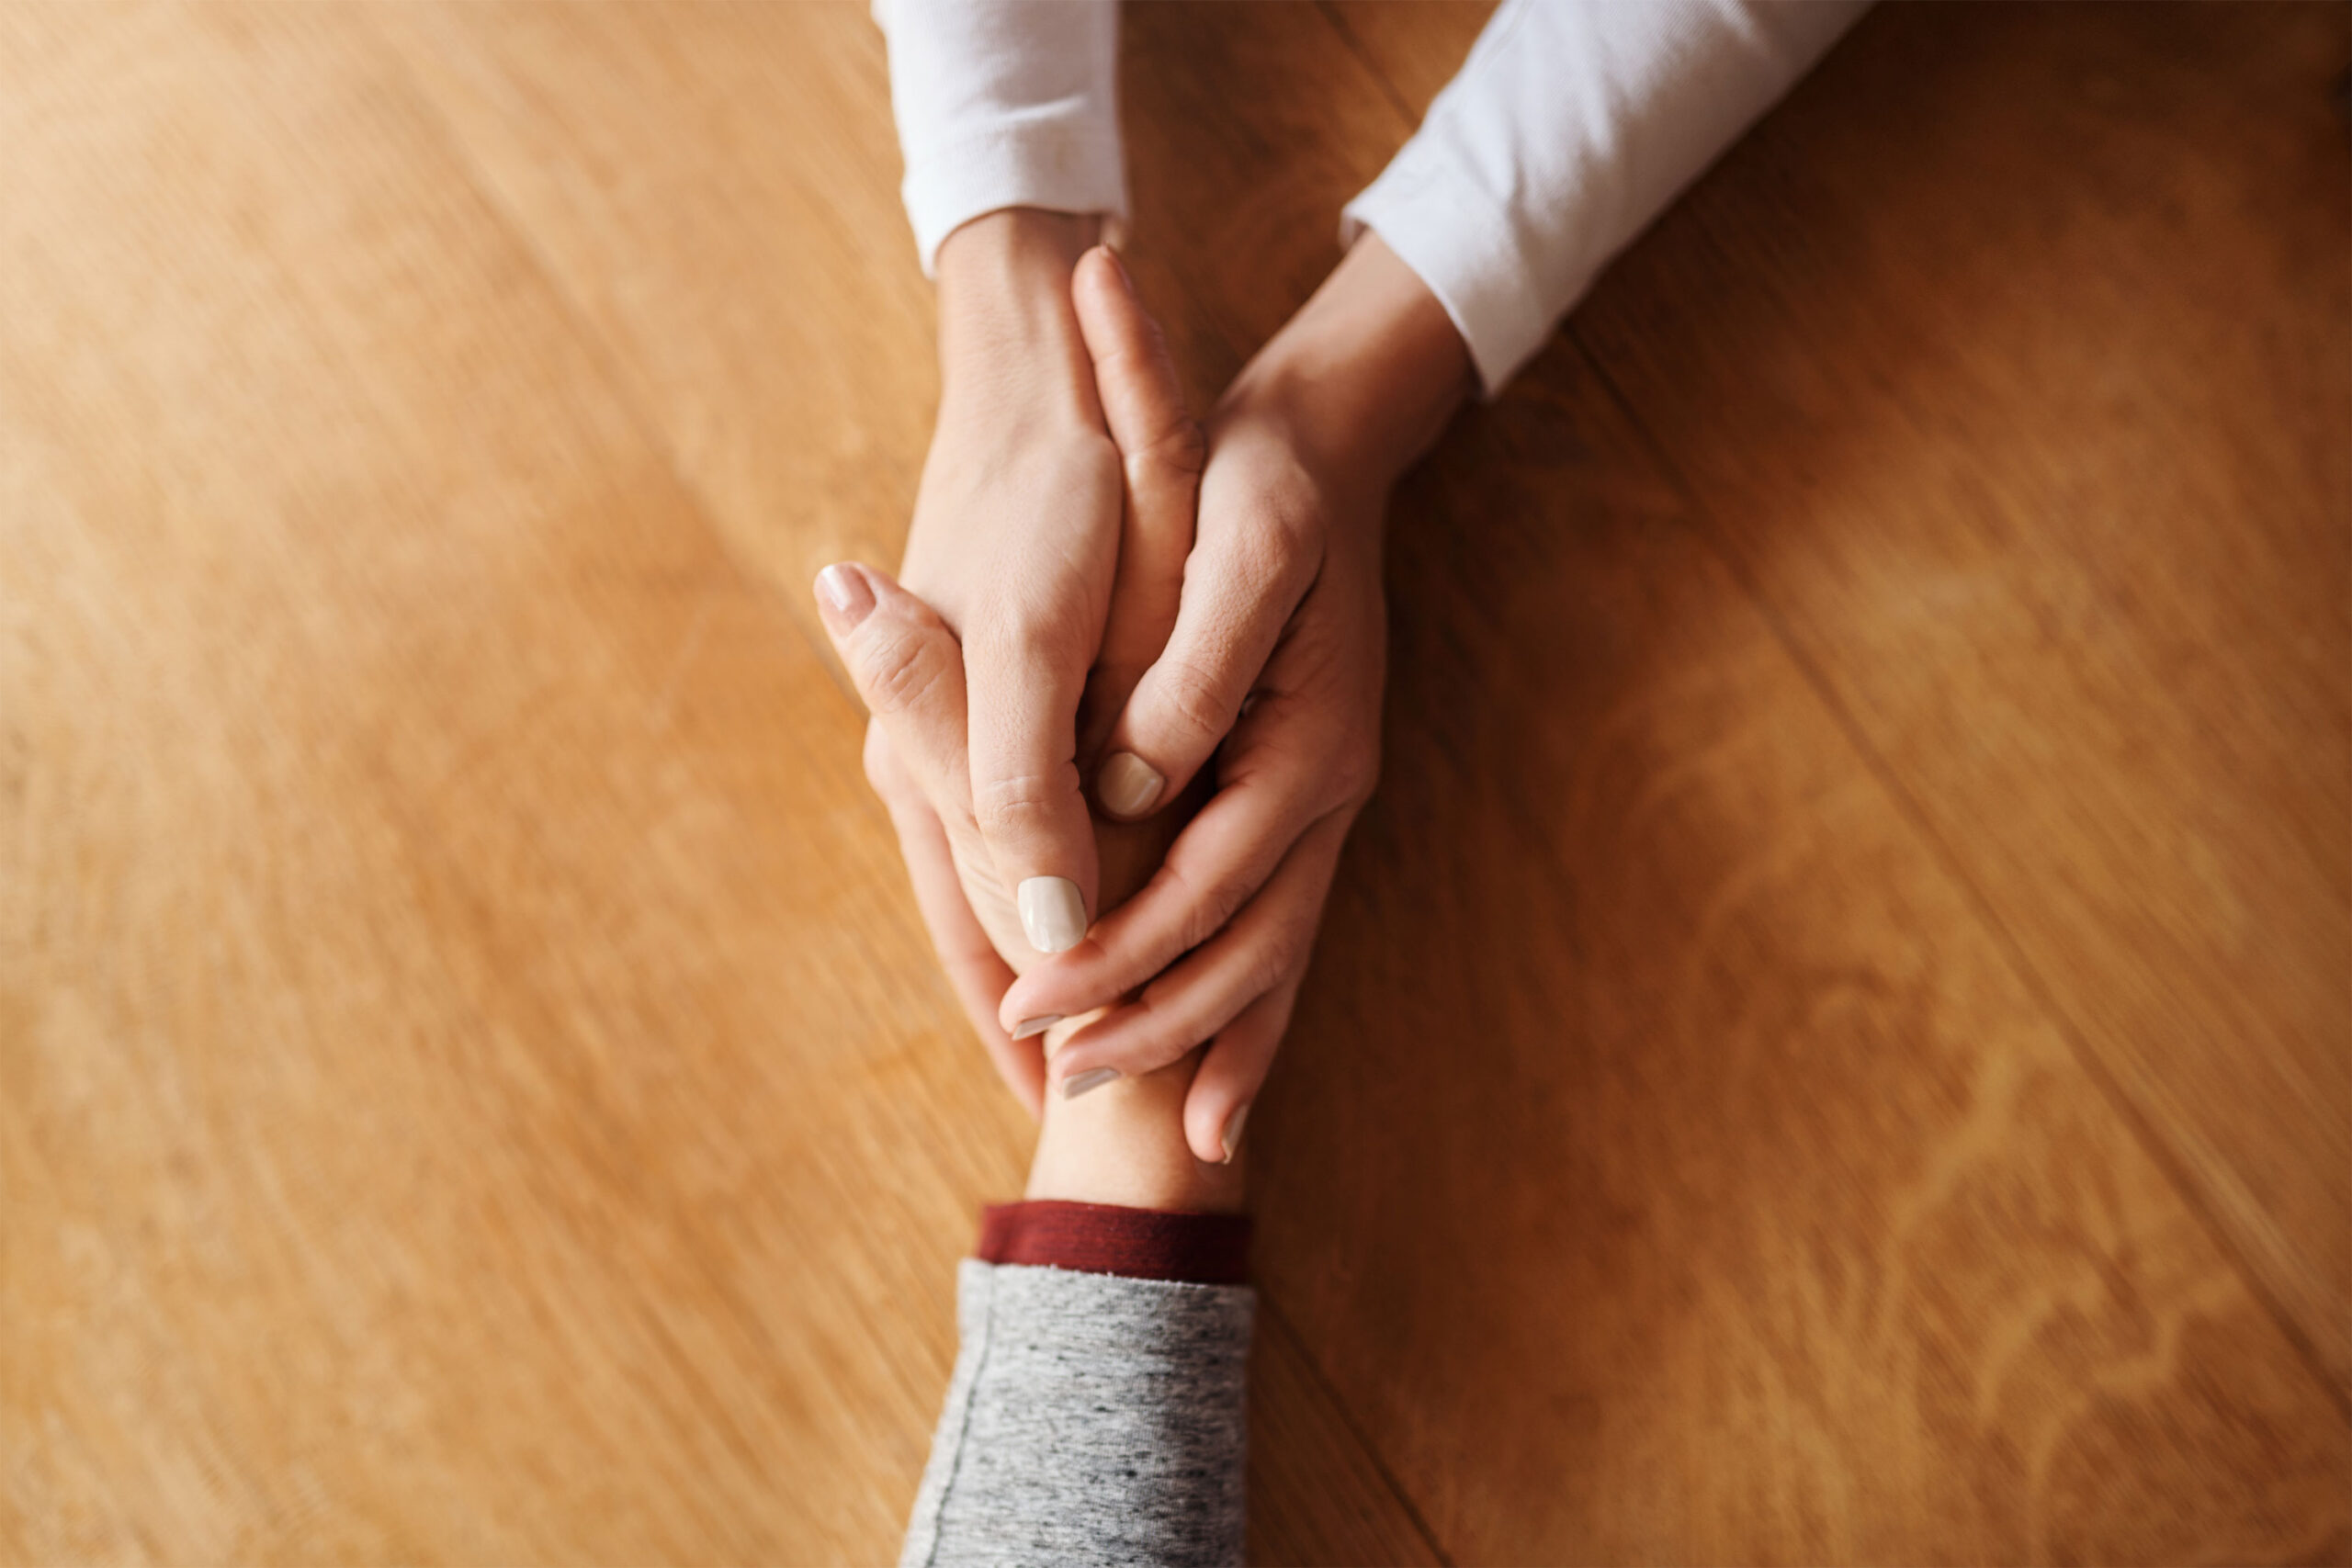 A photo of two people holding hands and offering support